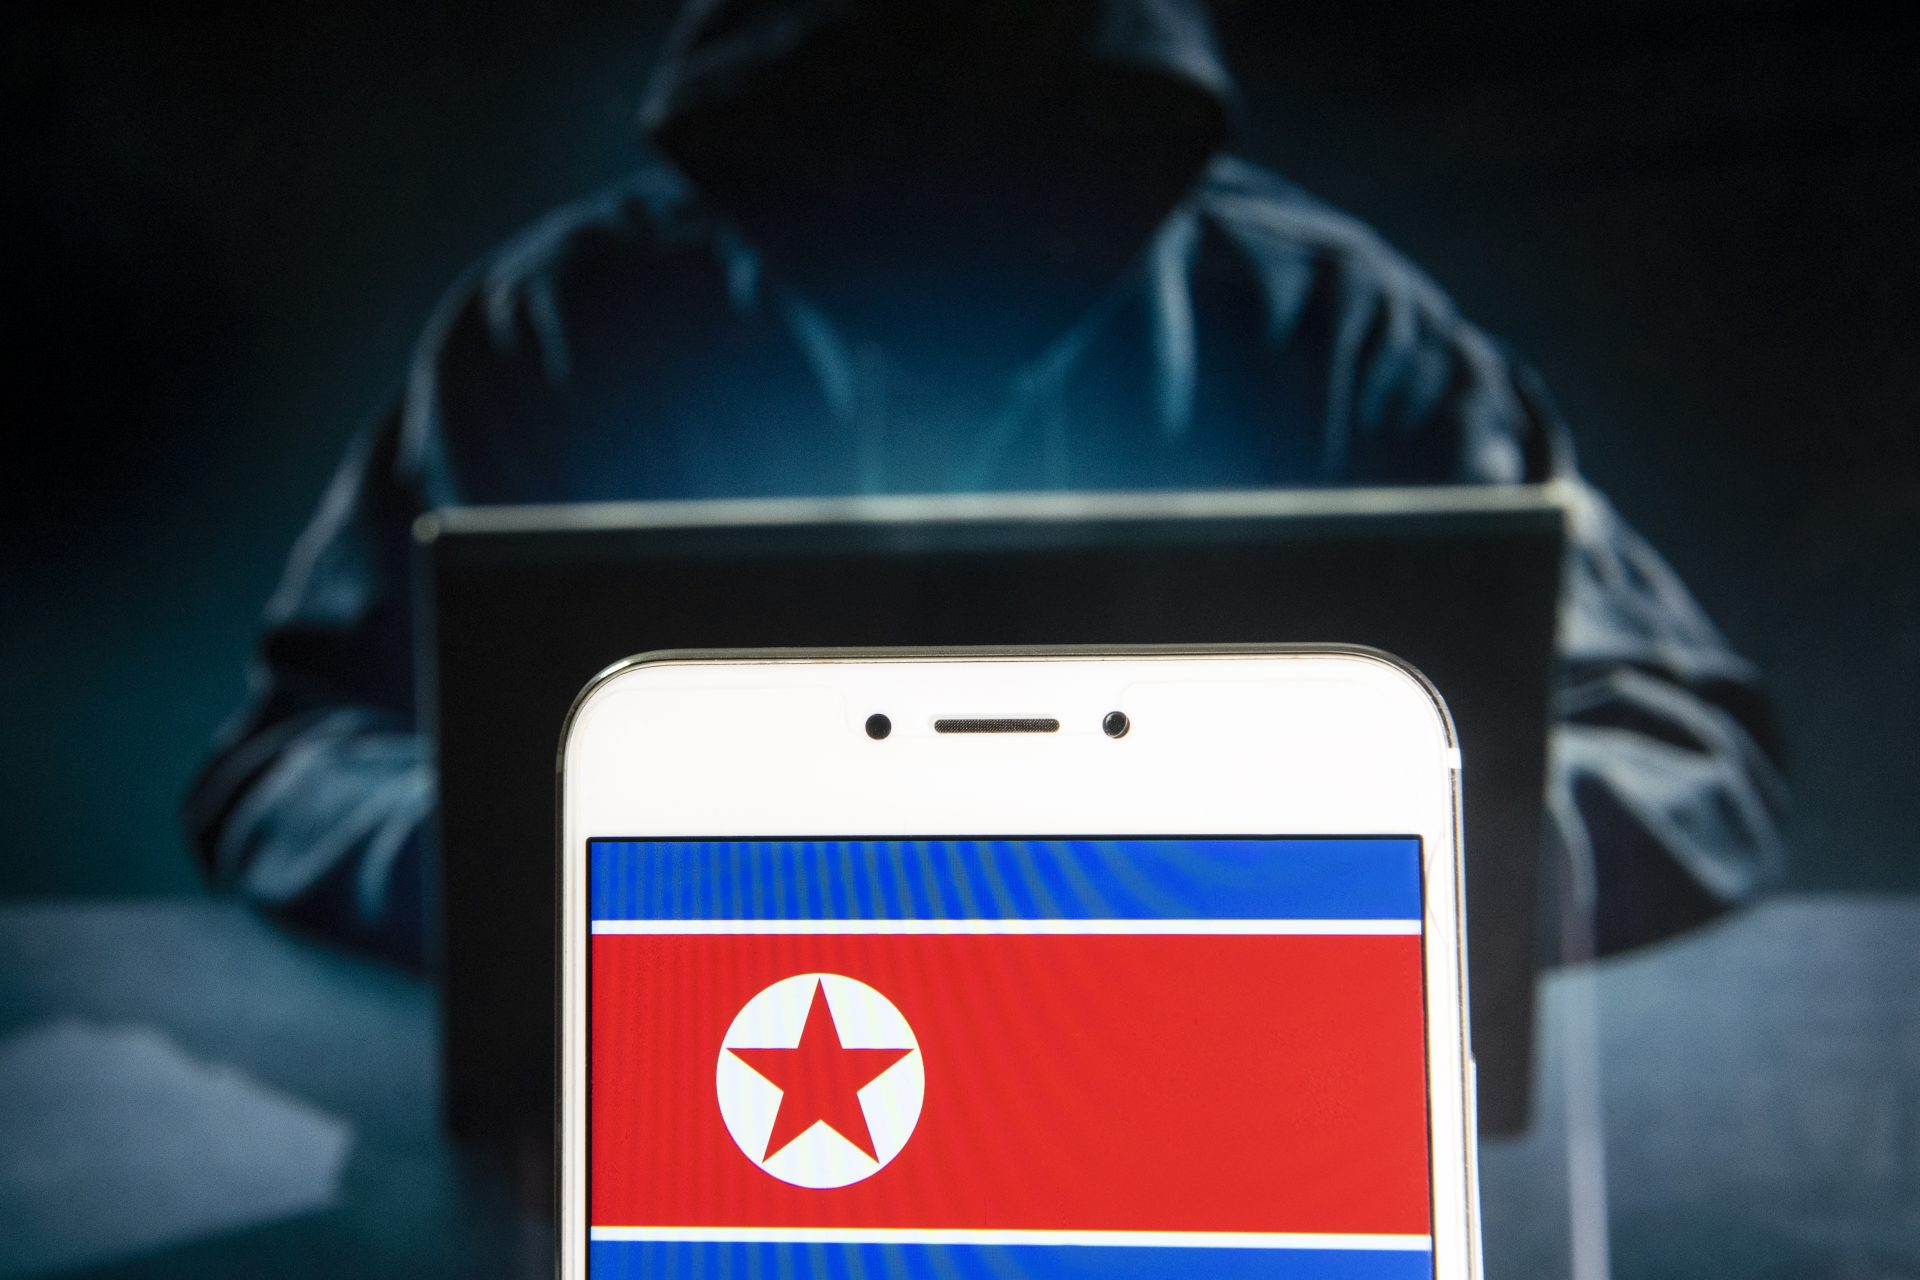 North Korea is trying to influence you and you might not even know it